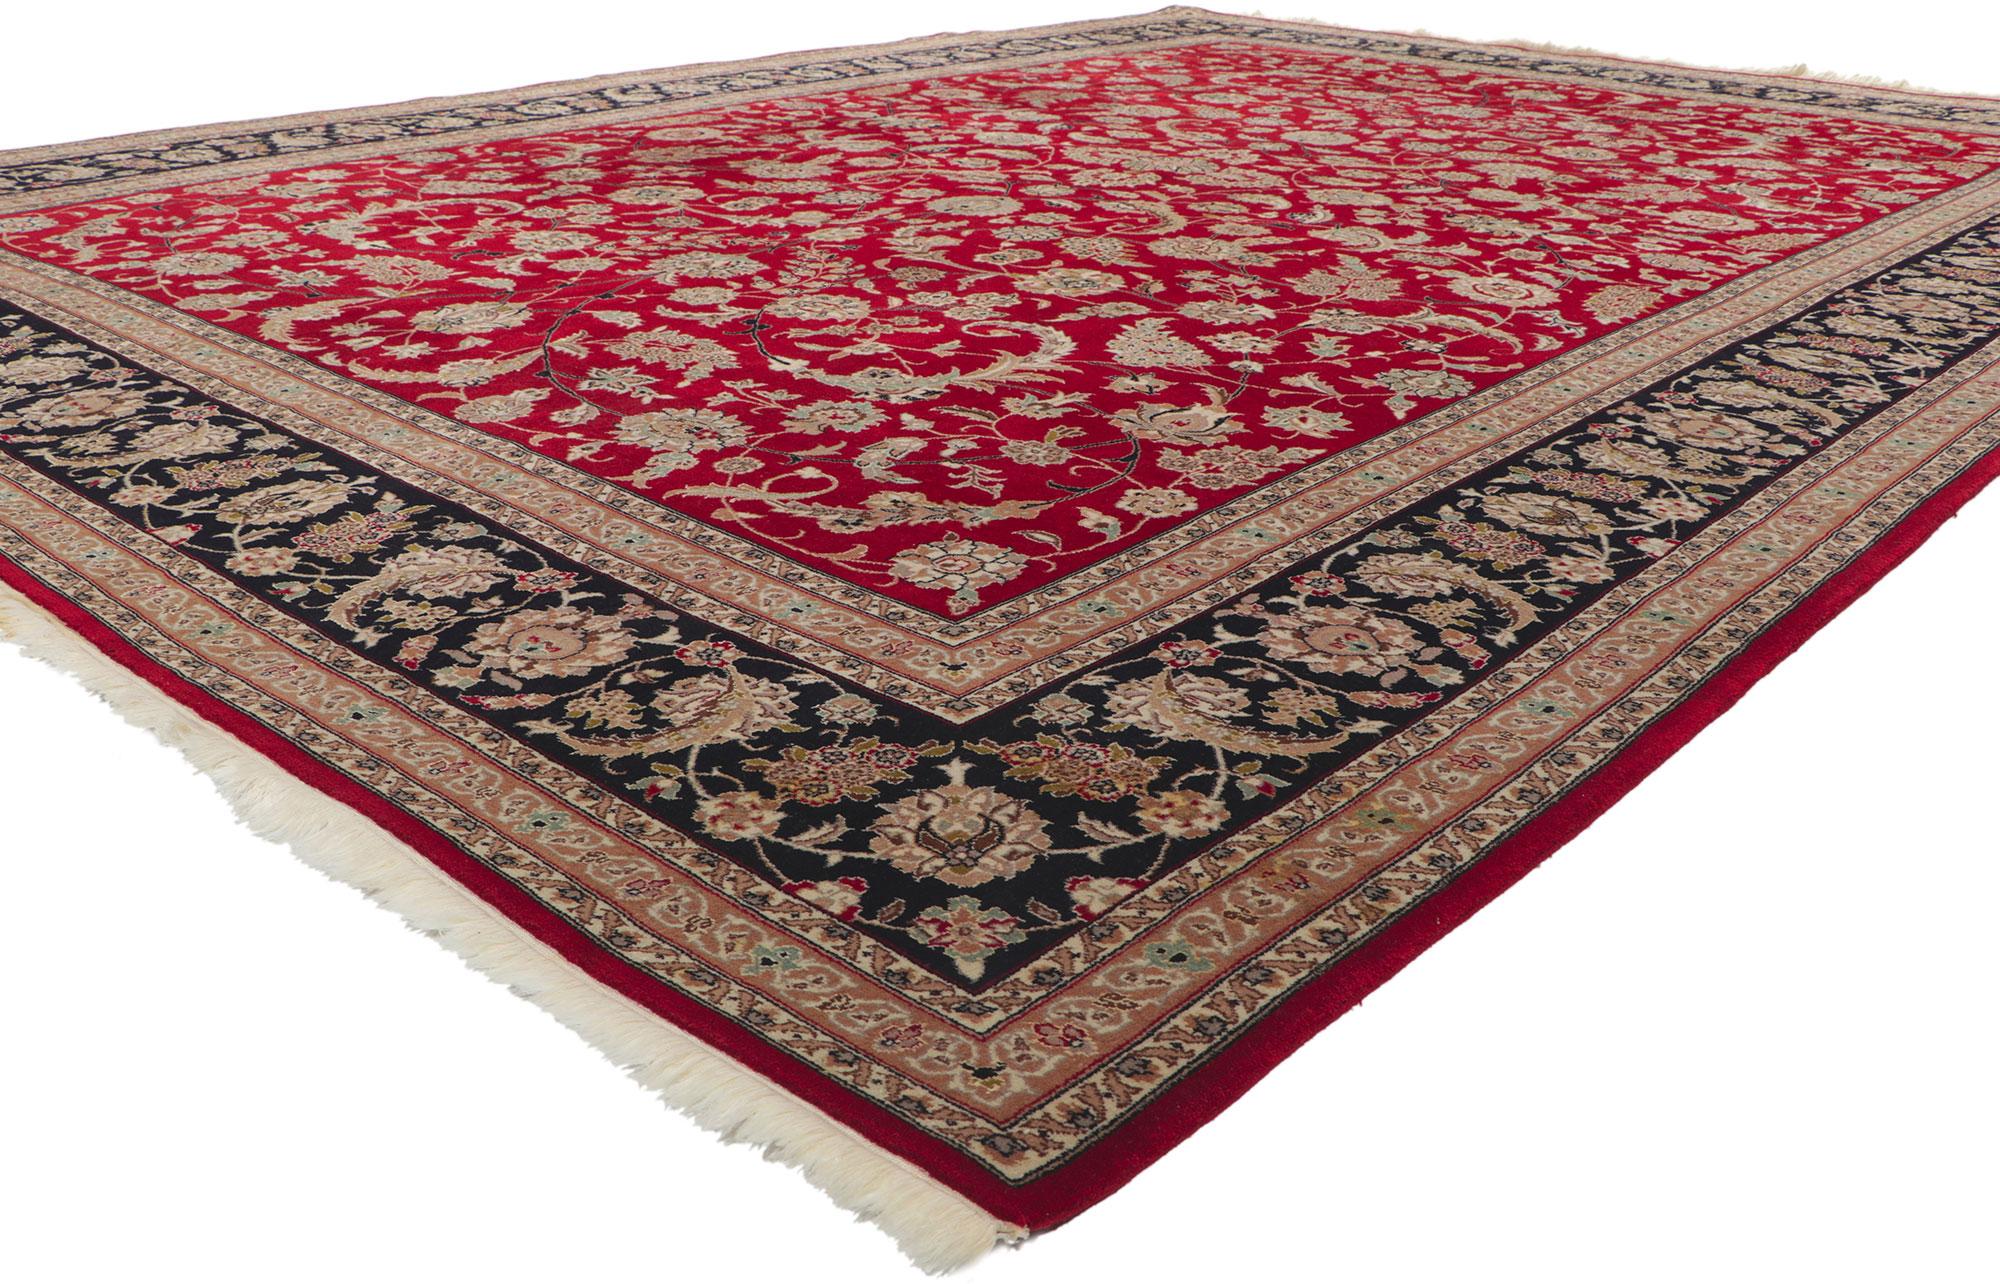 ?78360 Vintage Indian Tabriz wool and silk rug, 09'09 x 13'07. With timeless appeal and ornate decorative detailing, this wool and silk vintage Indian Tabriz rug is a captivating vision of woven beauty. The red field is covered in an allover floral